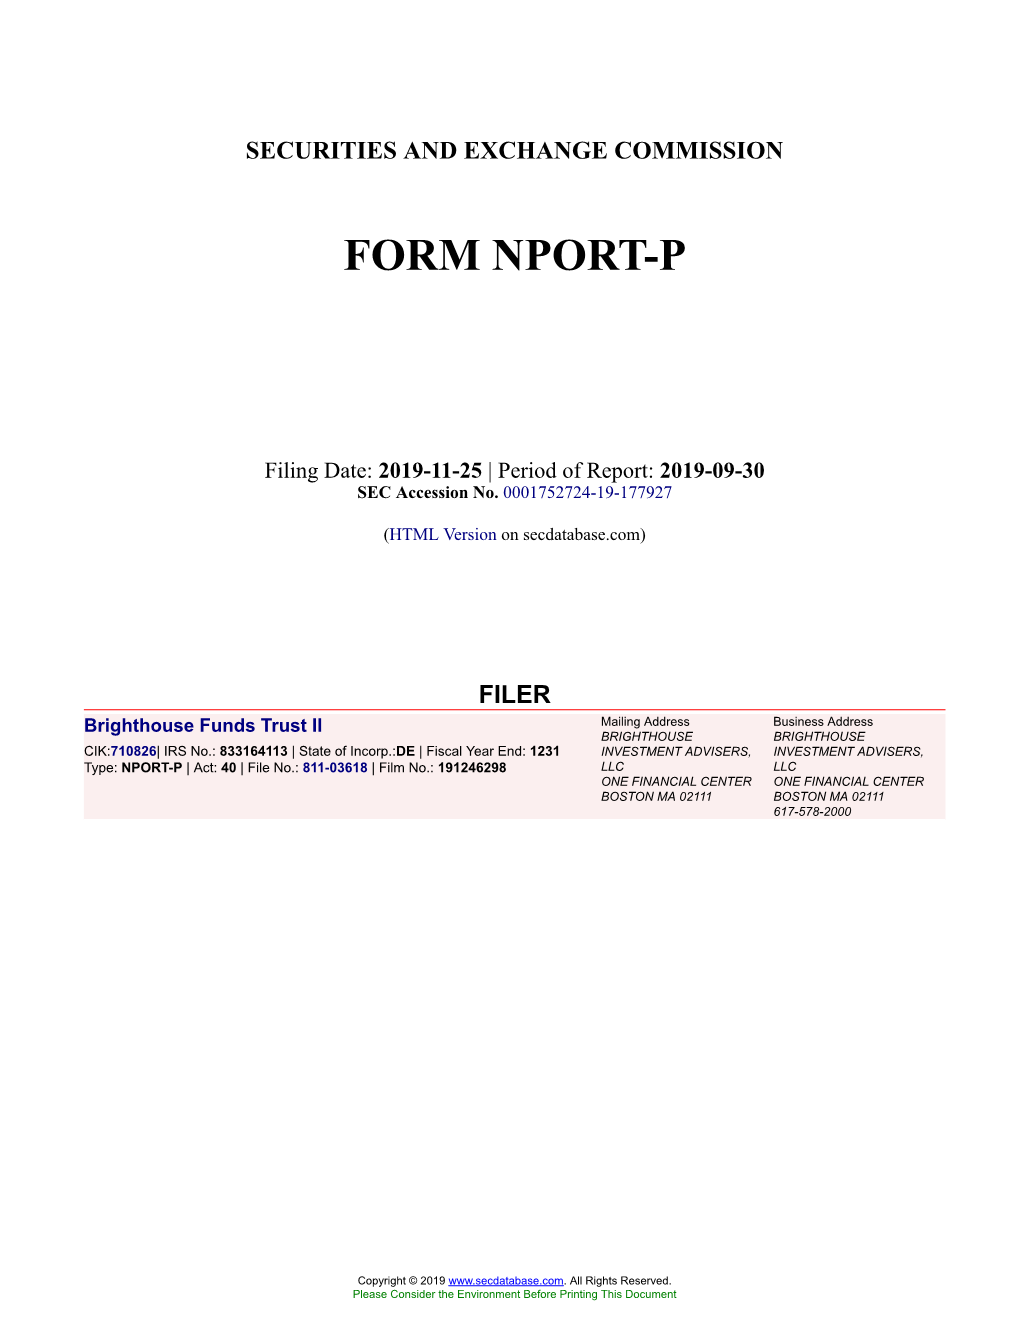 Brighthouse Funds Trust II Form NPORT-P Filed 2019-11-25